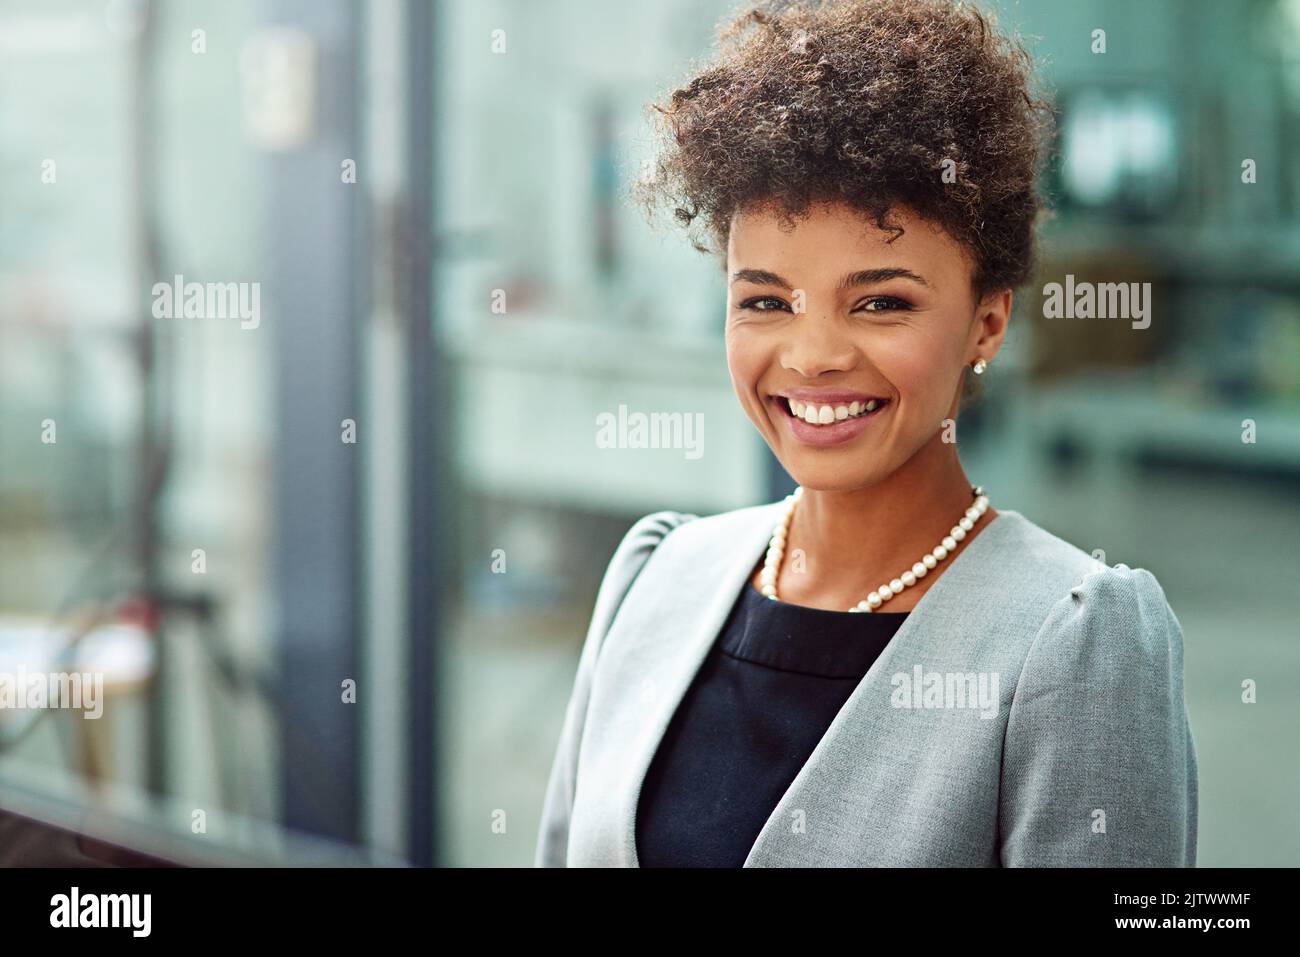 Moving and shaking her way up the corporate ladder. Cropped portrait of a smiling young businesswoman in her office. Stock Photo